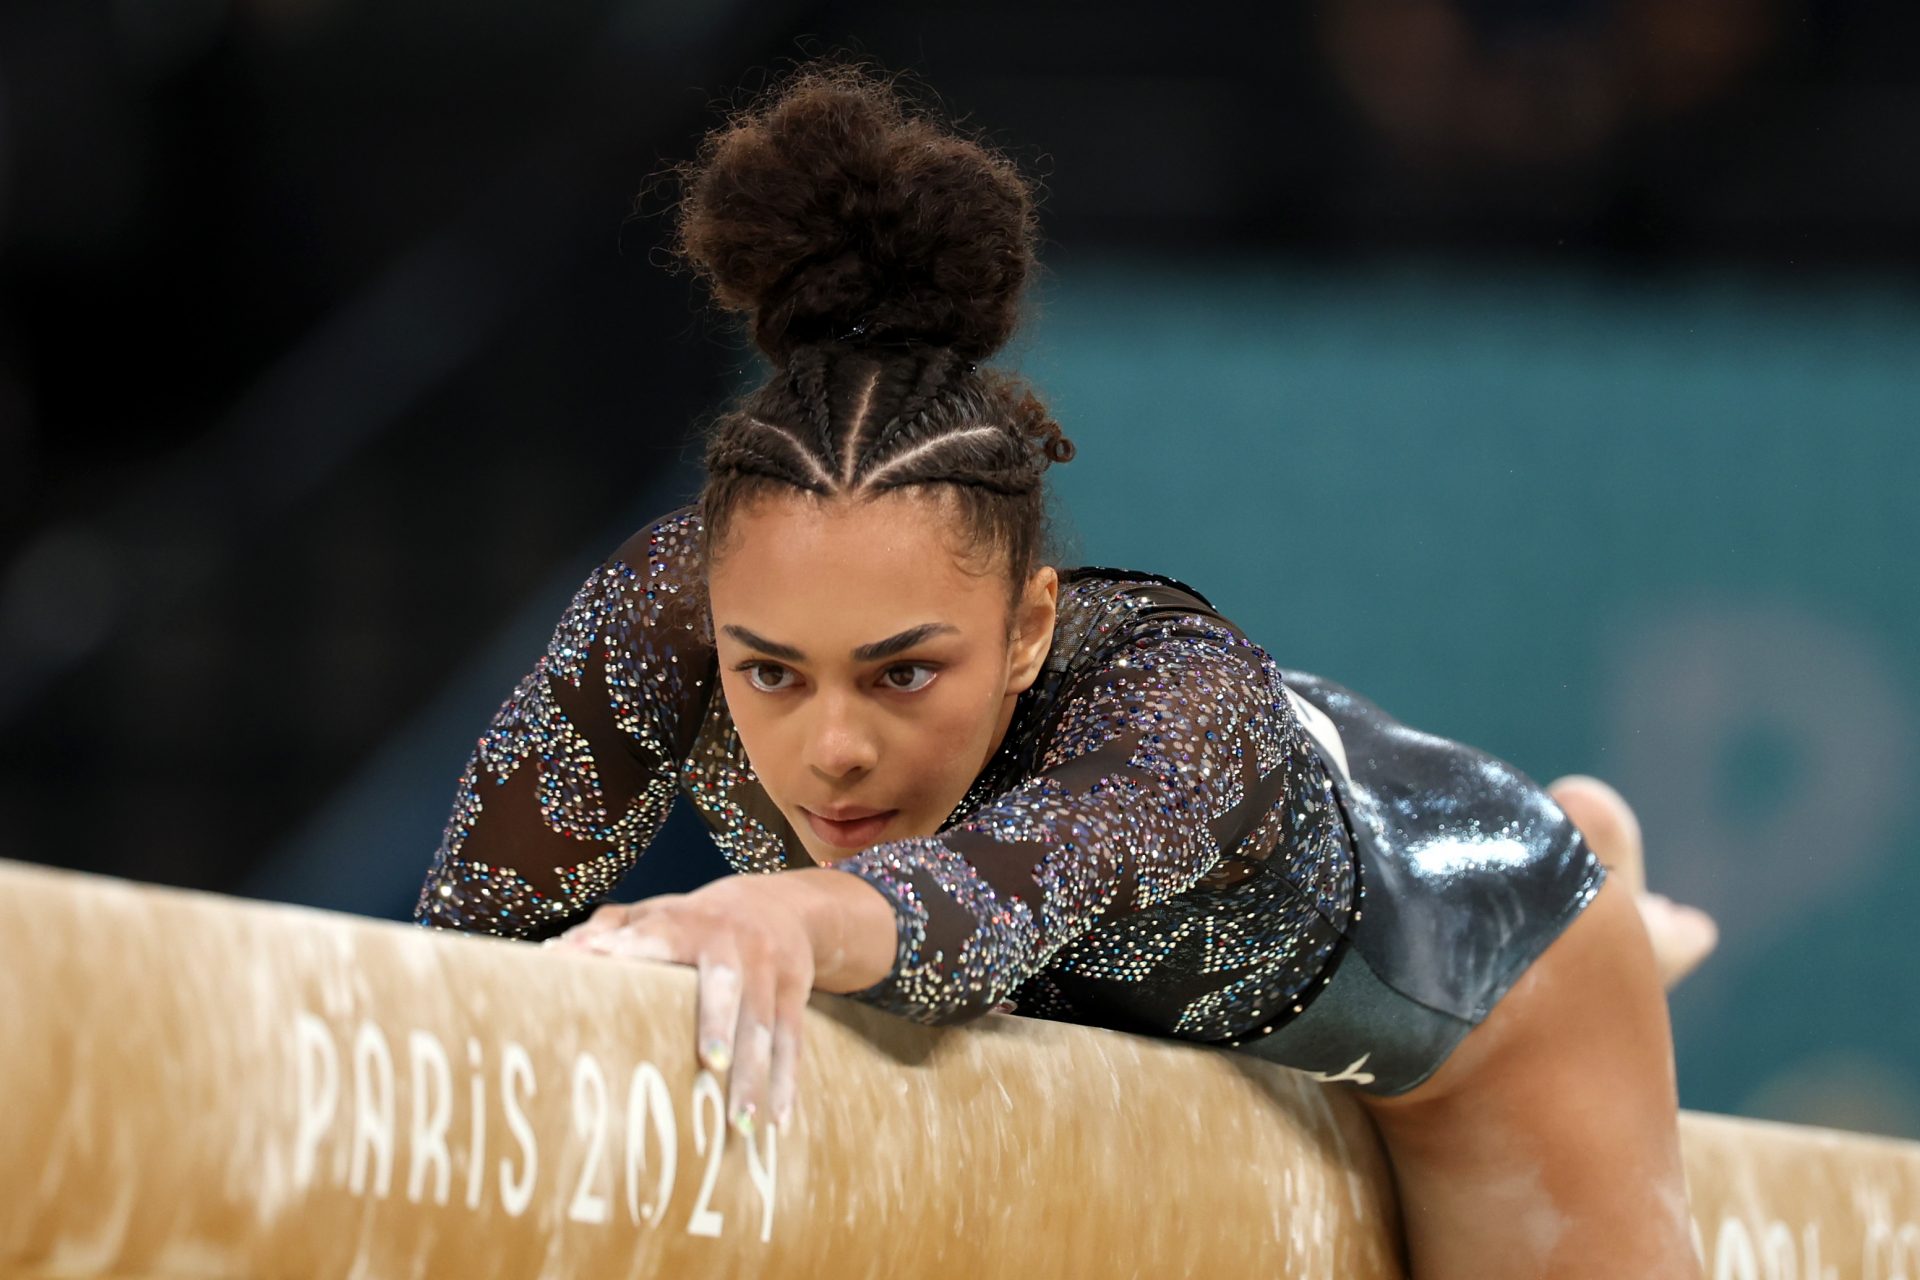 Gymnast sensation Hezly Rivera makes her highly anticipated Olympic debut